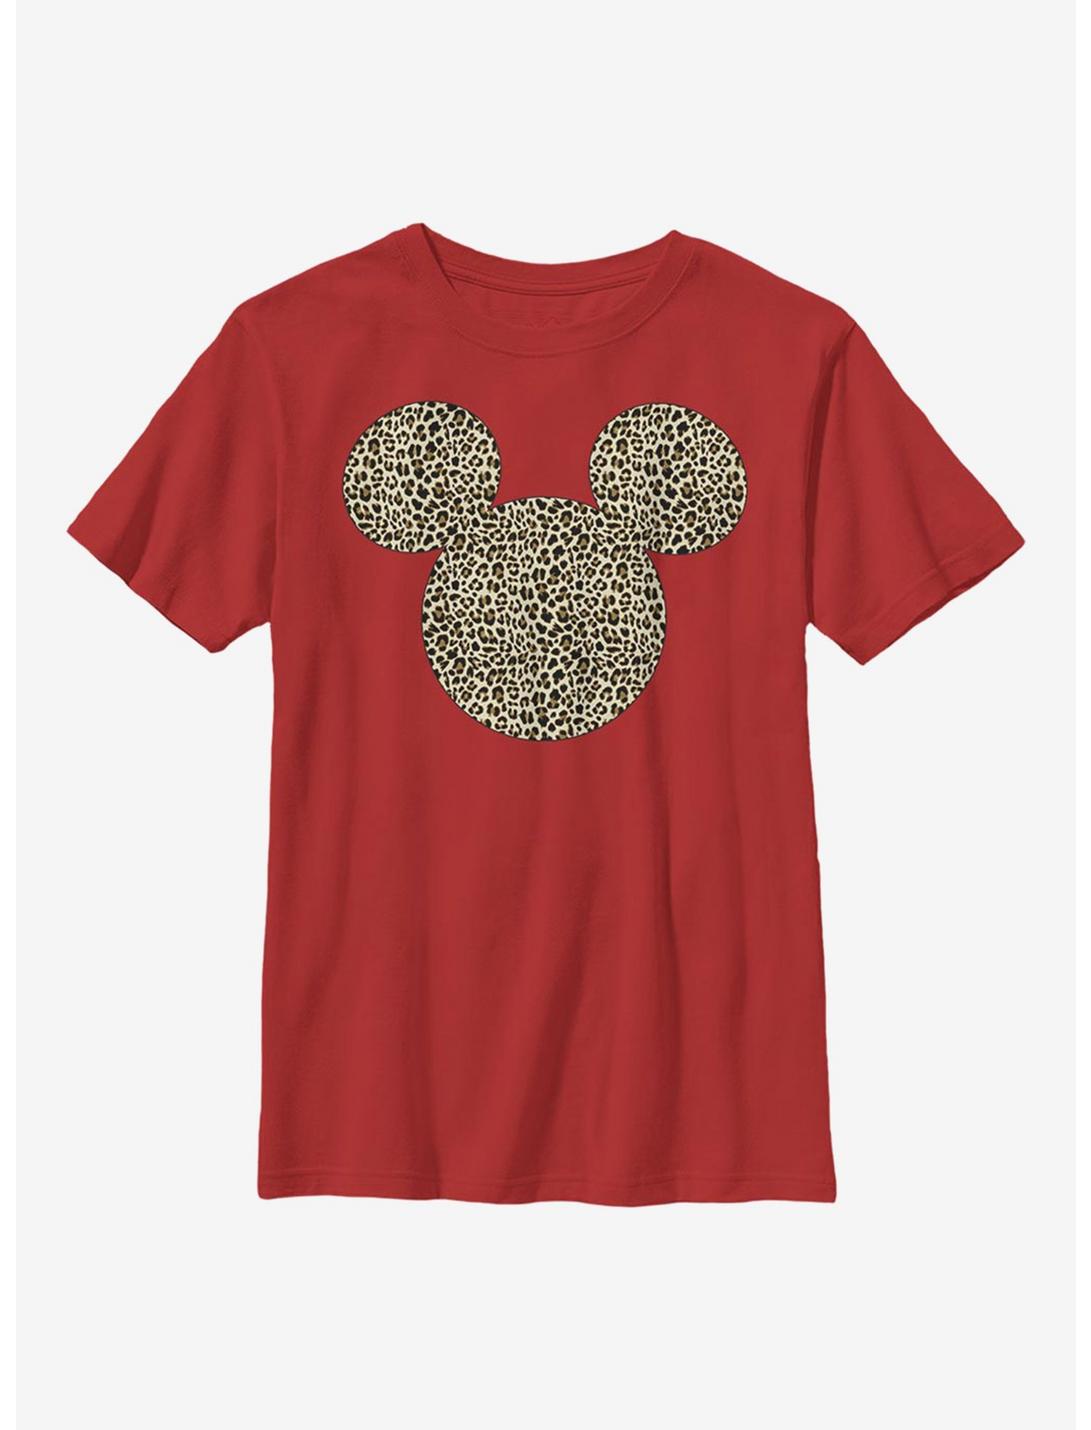 Disney Mickey Mouse Animal Ears Youth T-Shirt, RED, hi-res